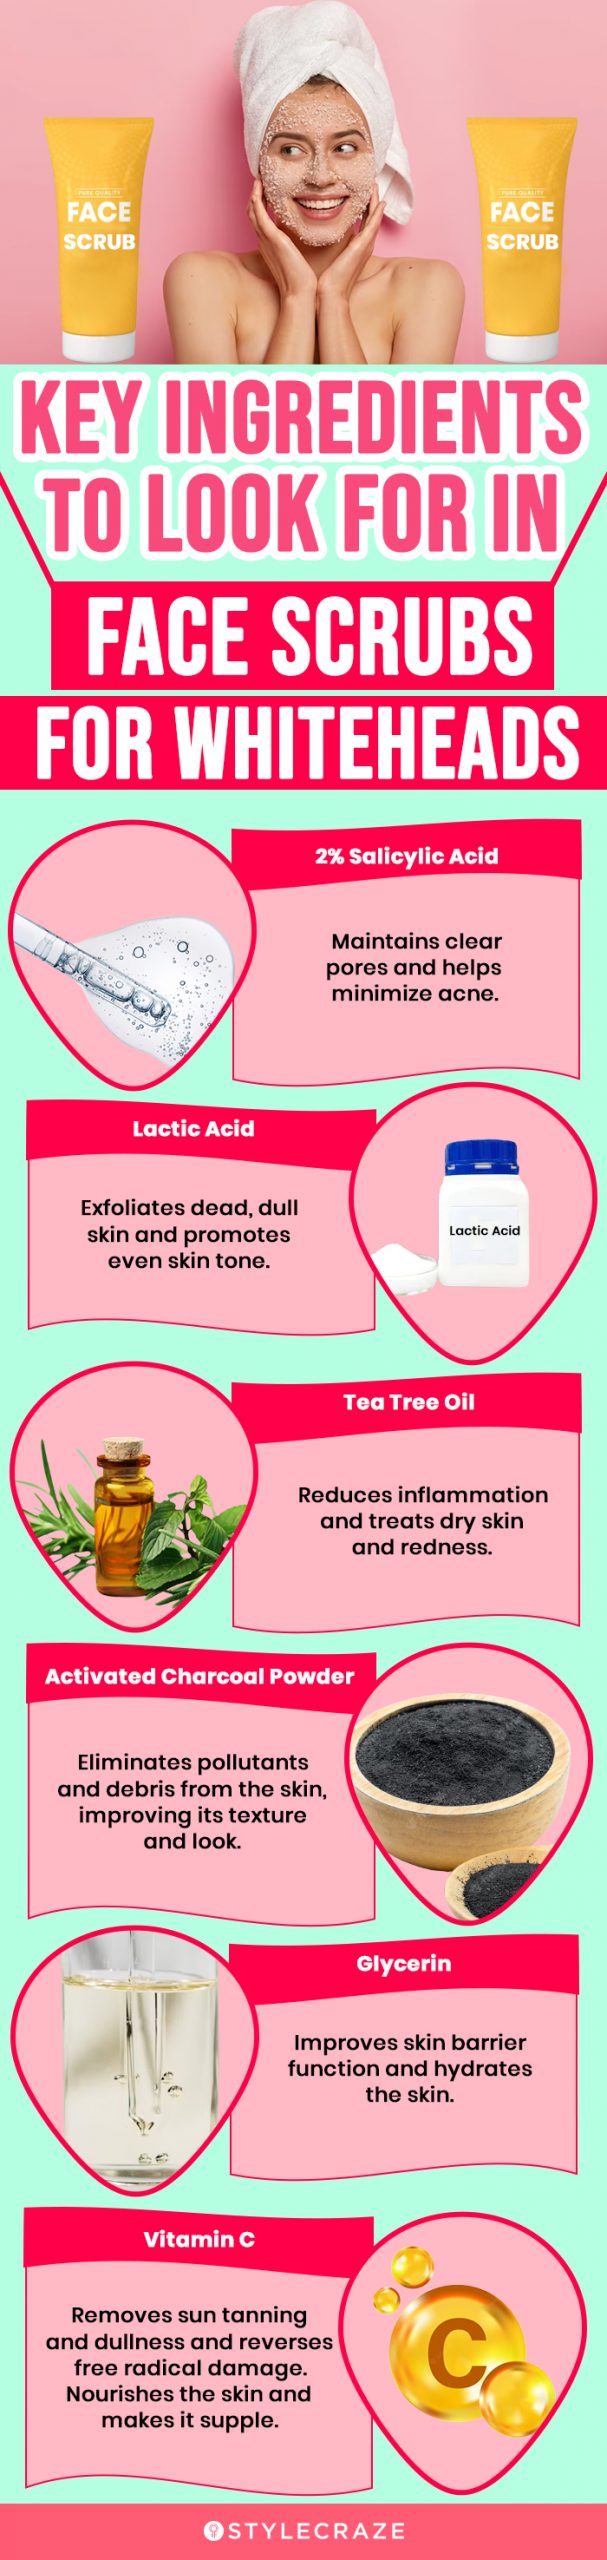 Key Ingredients To Look For In Face Scrubs For Whiteheads (infographic)